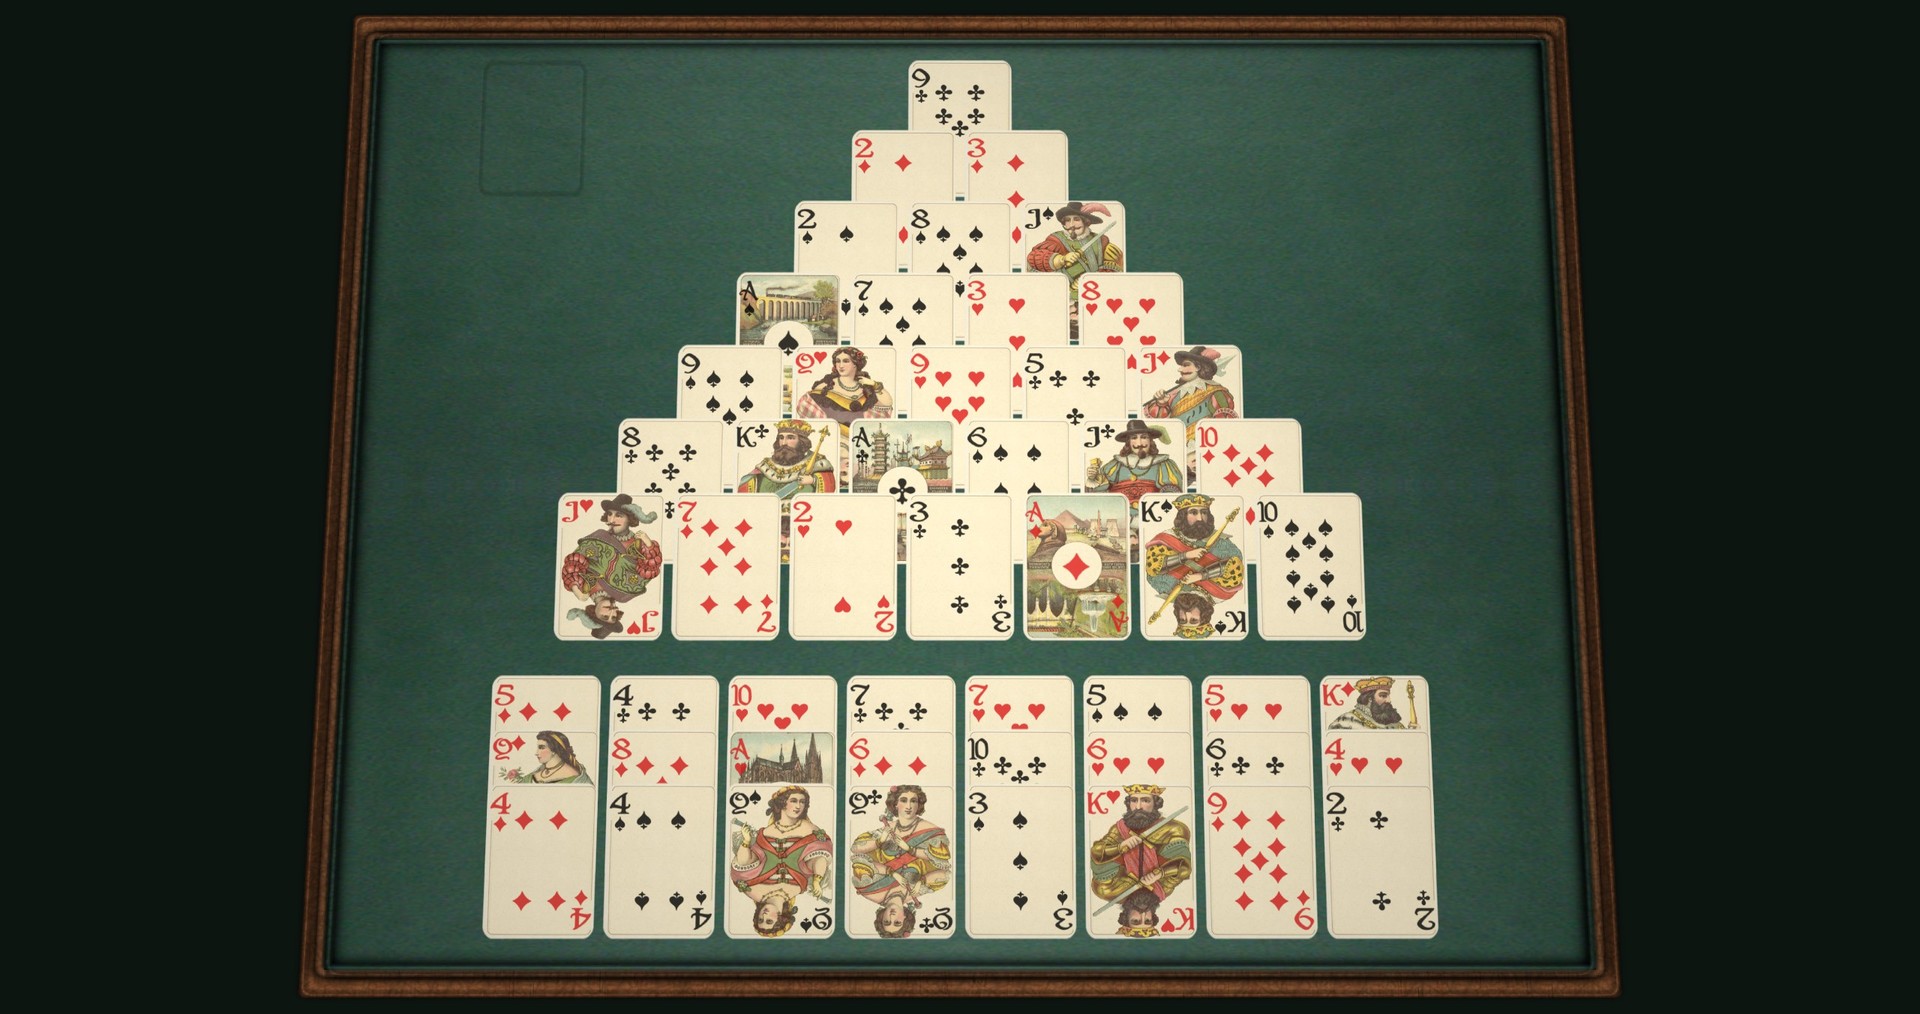 Solitaire 3D Free Download